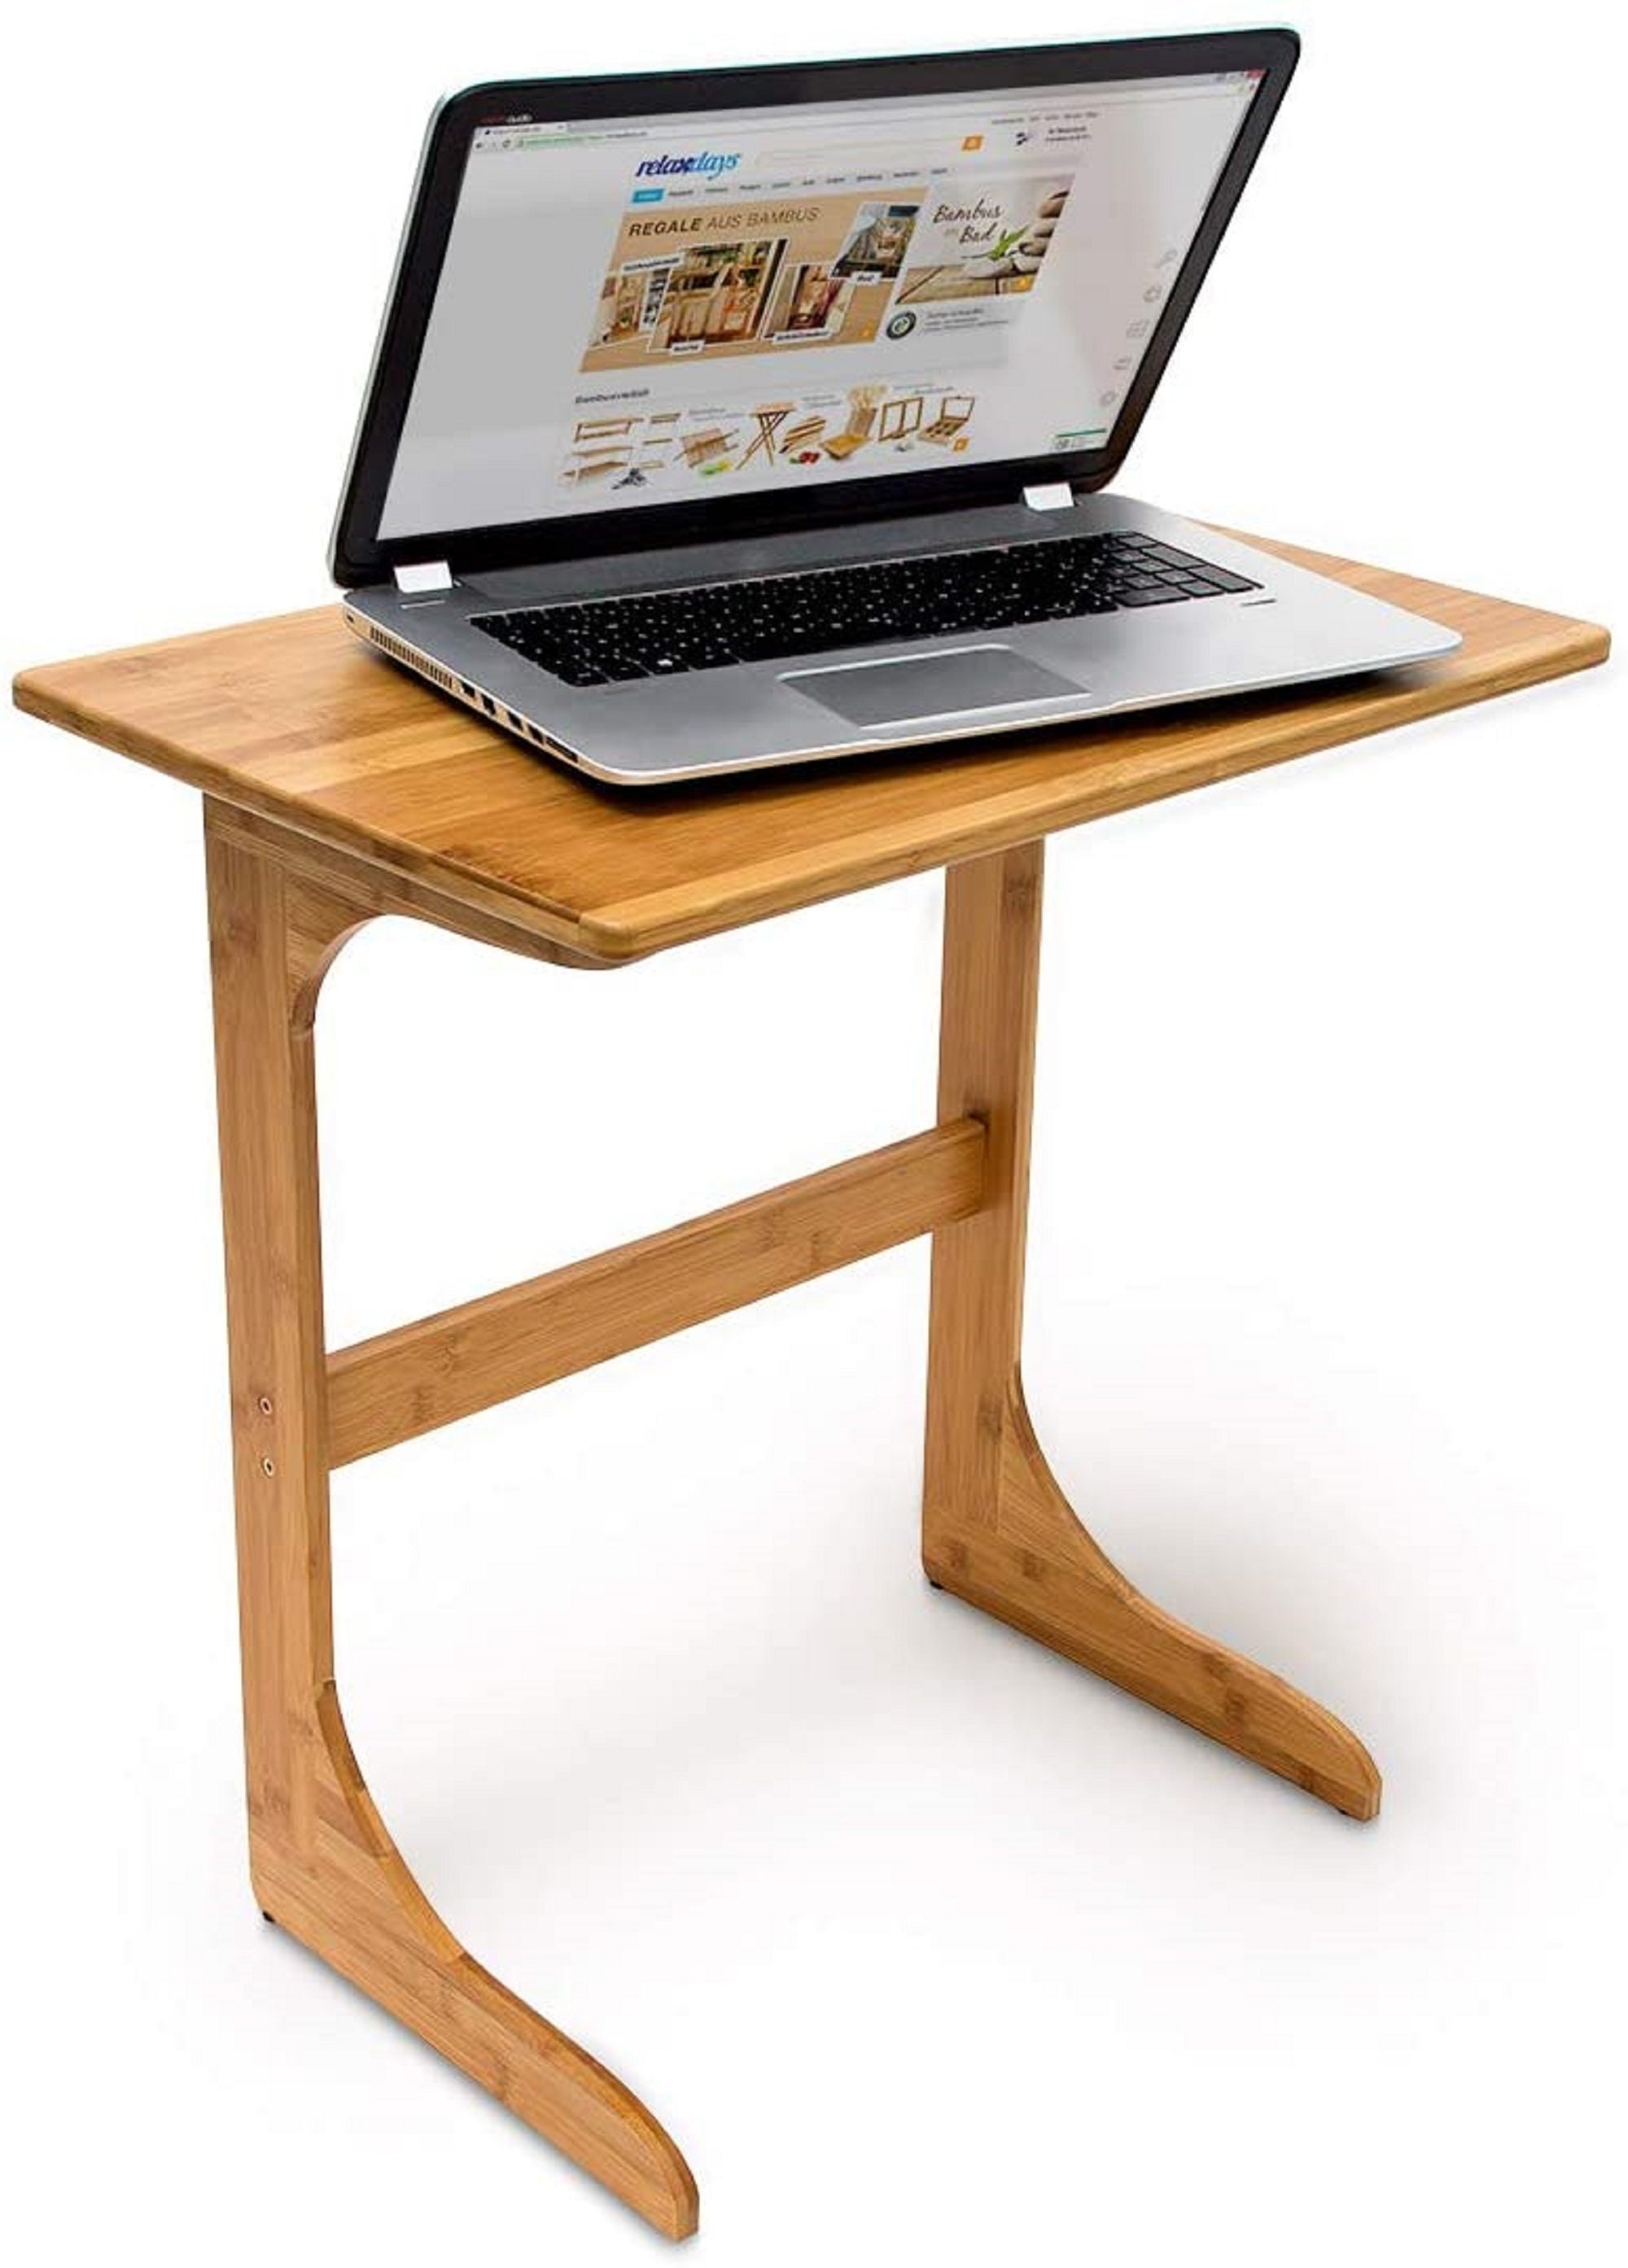 stad Pijlpunt Stiptheid Bamboo Laptop Table Bed Side Table Coffee Table With Wooden - Etsy